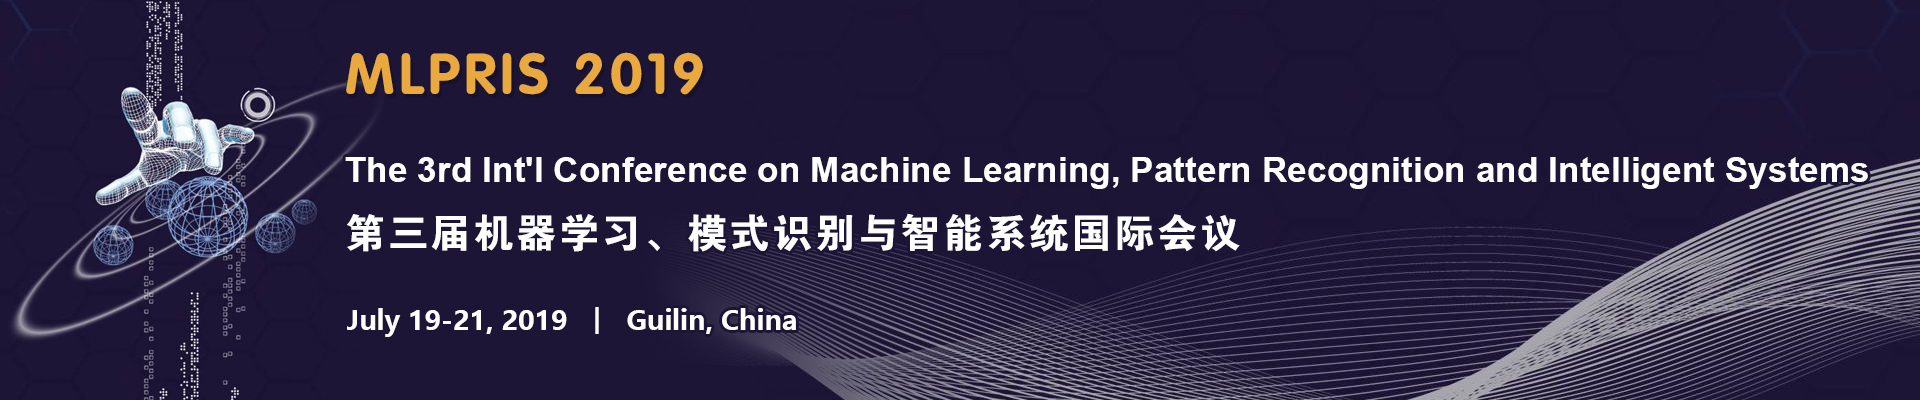 The 3rd Int'l Conference on Machine Learning, Pattern Recognition and Intelligent Systems (MLPRIS 2019), Guilin, Guangxi, China